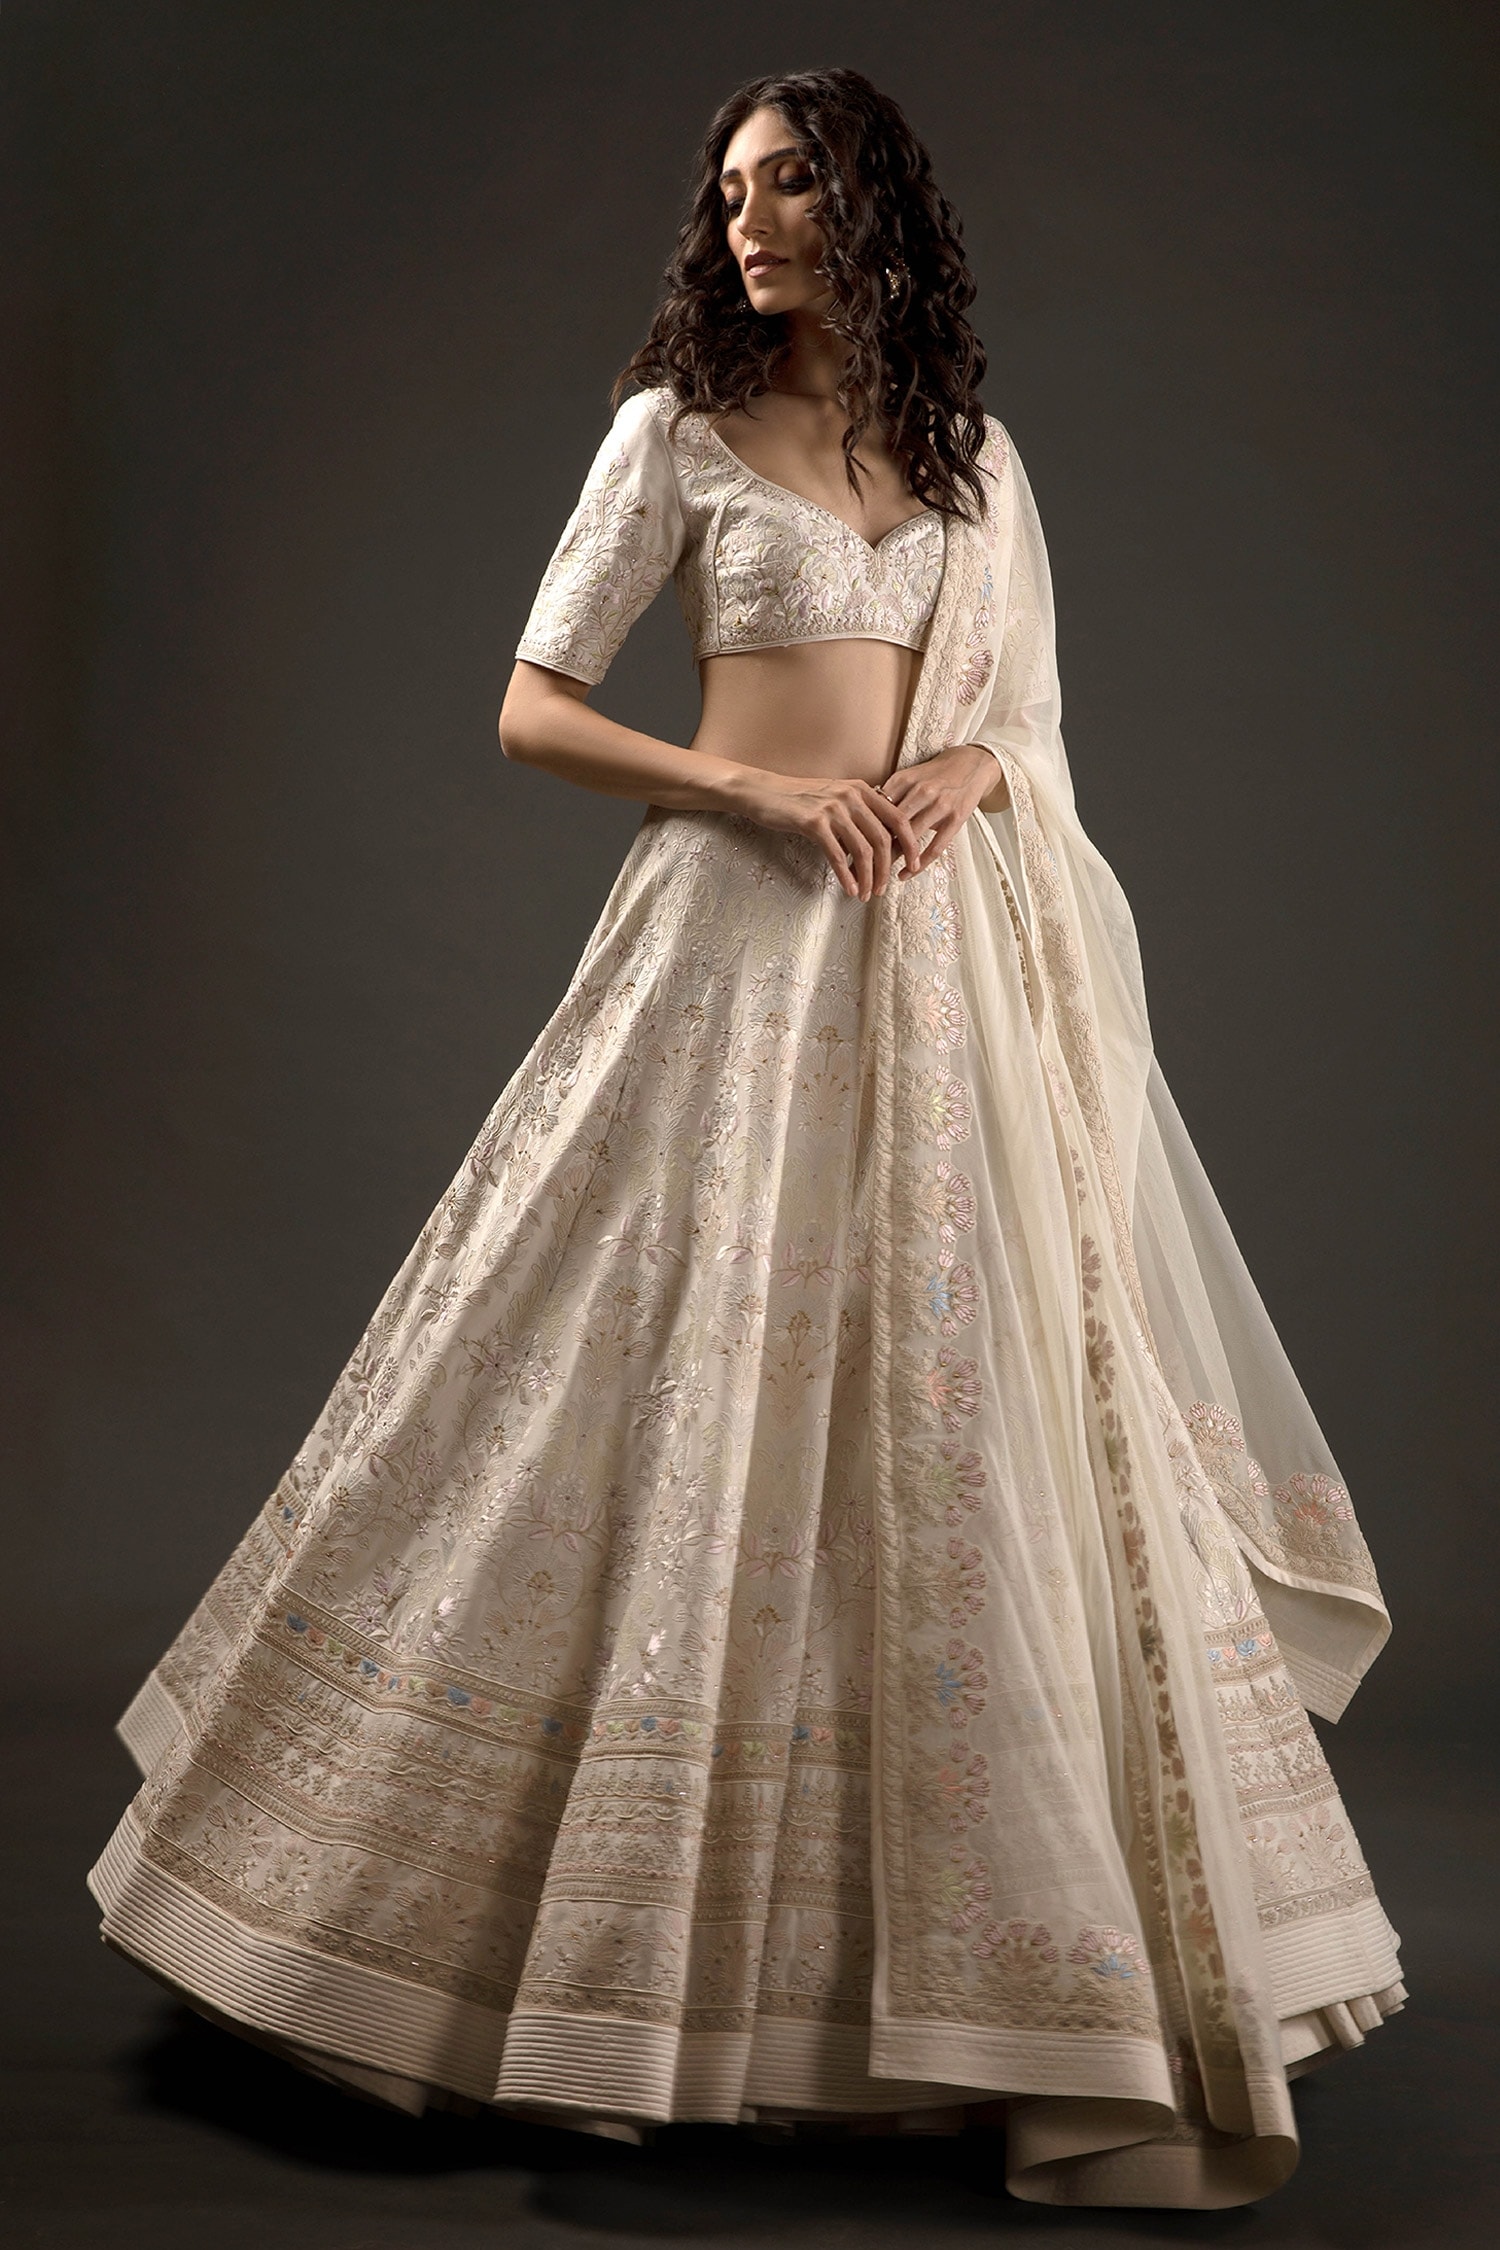 Looking for Wedding Lehengas? Your Fav Celebrities are here to Help!